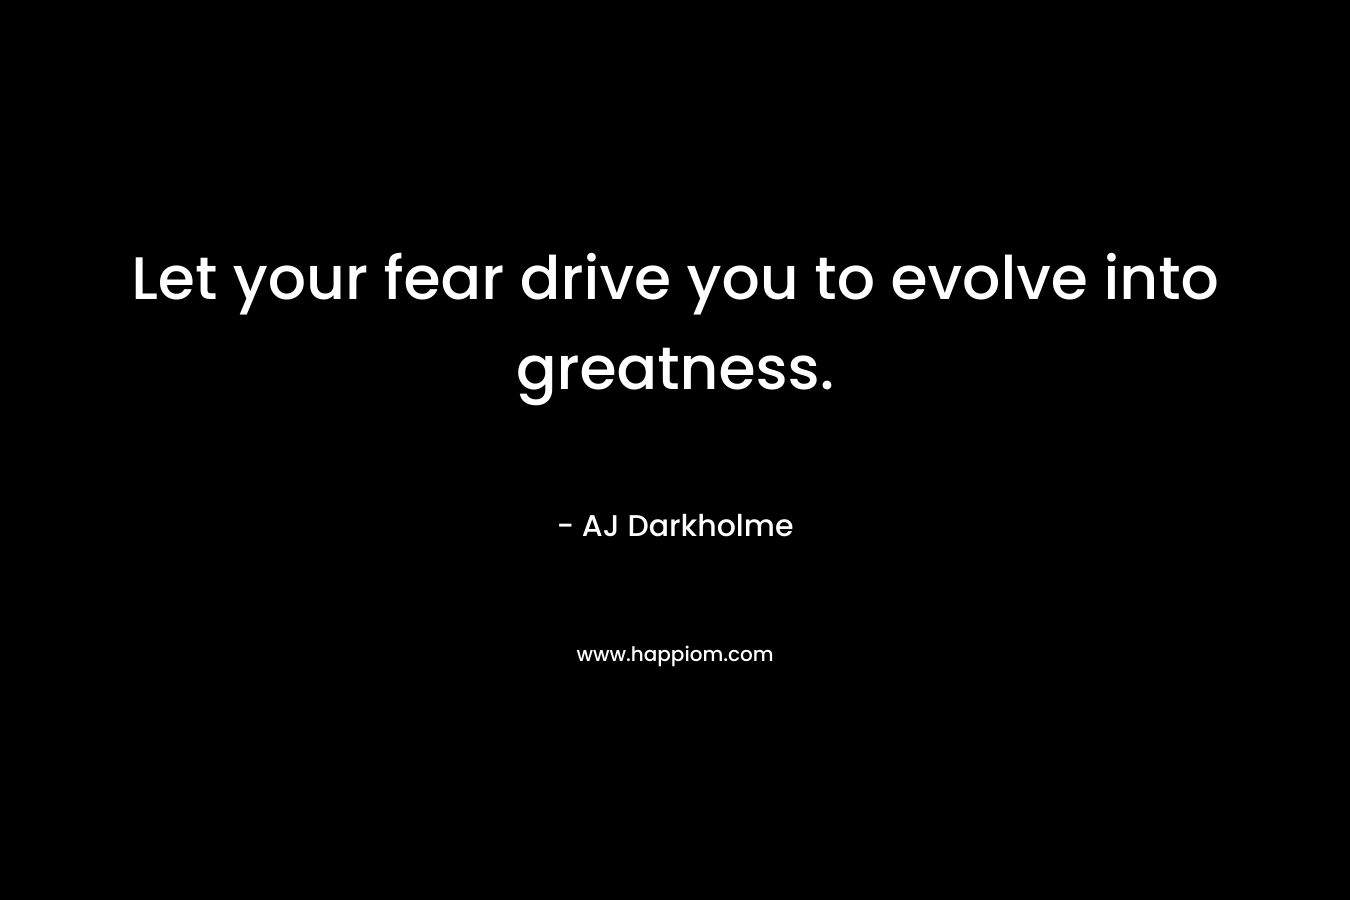 Let your fear drive you to evolve into greatness.